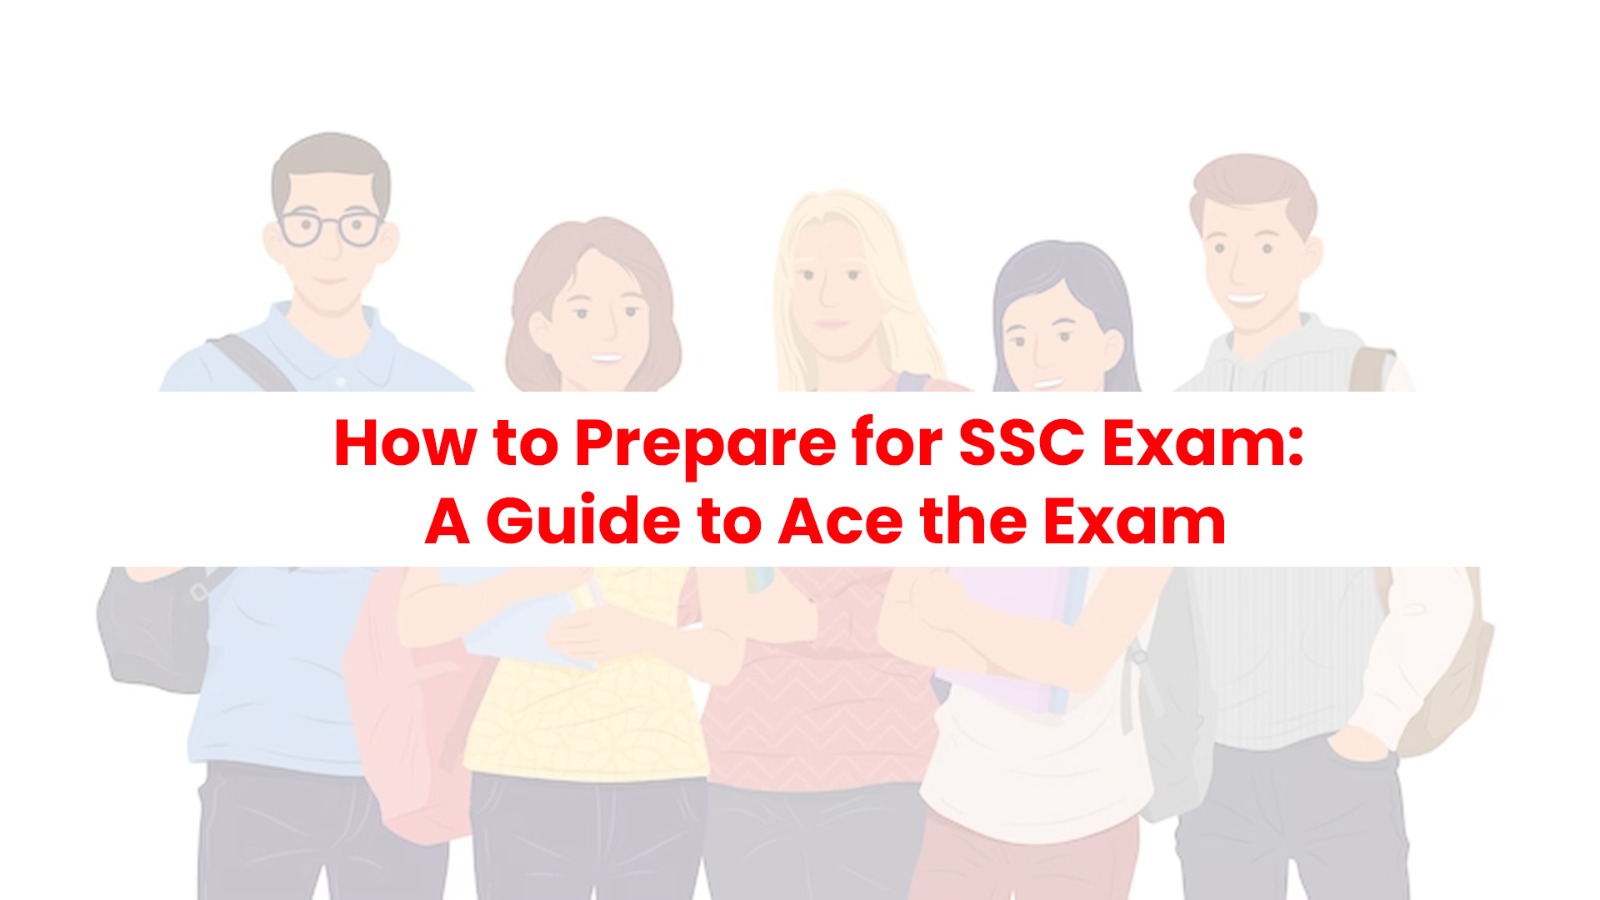 How to Prepare for SSC Exam: A Guide to Ace the Exam